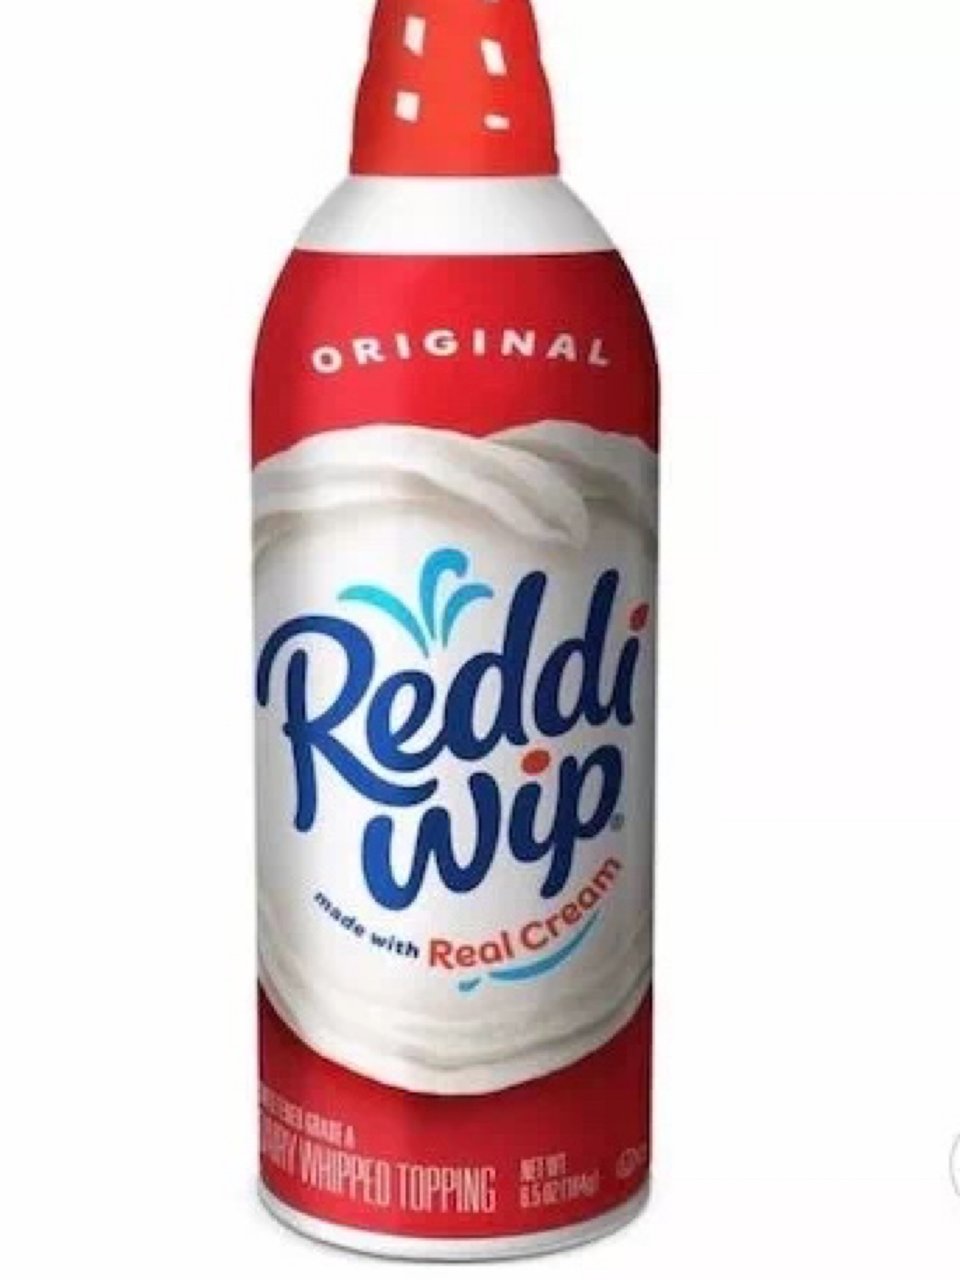 Reddi Wip Original Whipped Topping Made with Real Cream, 13 OZ Spray Can - Walmart.com